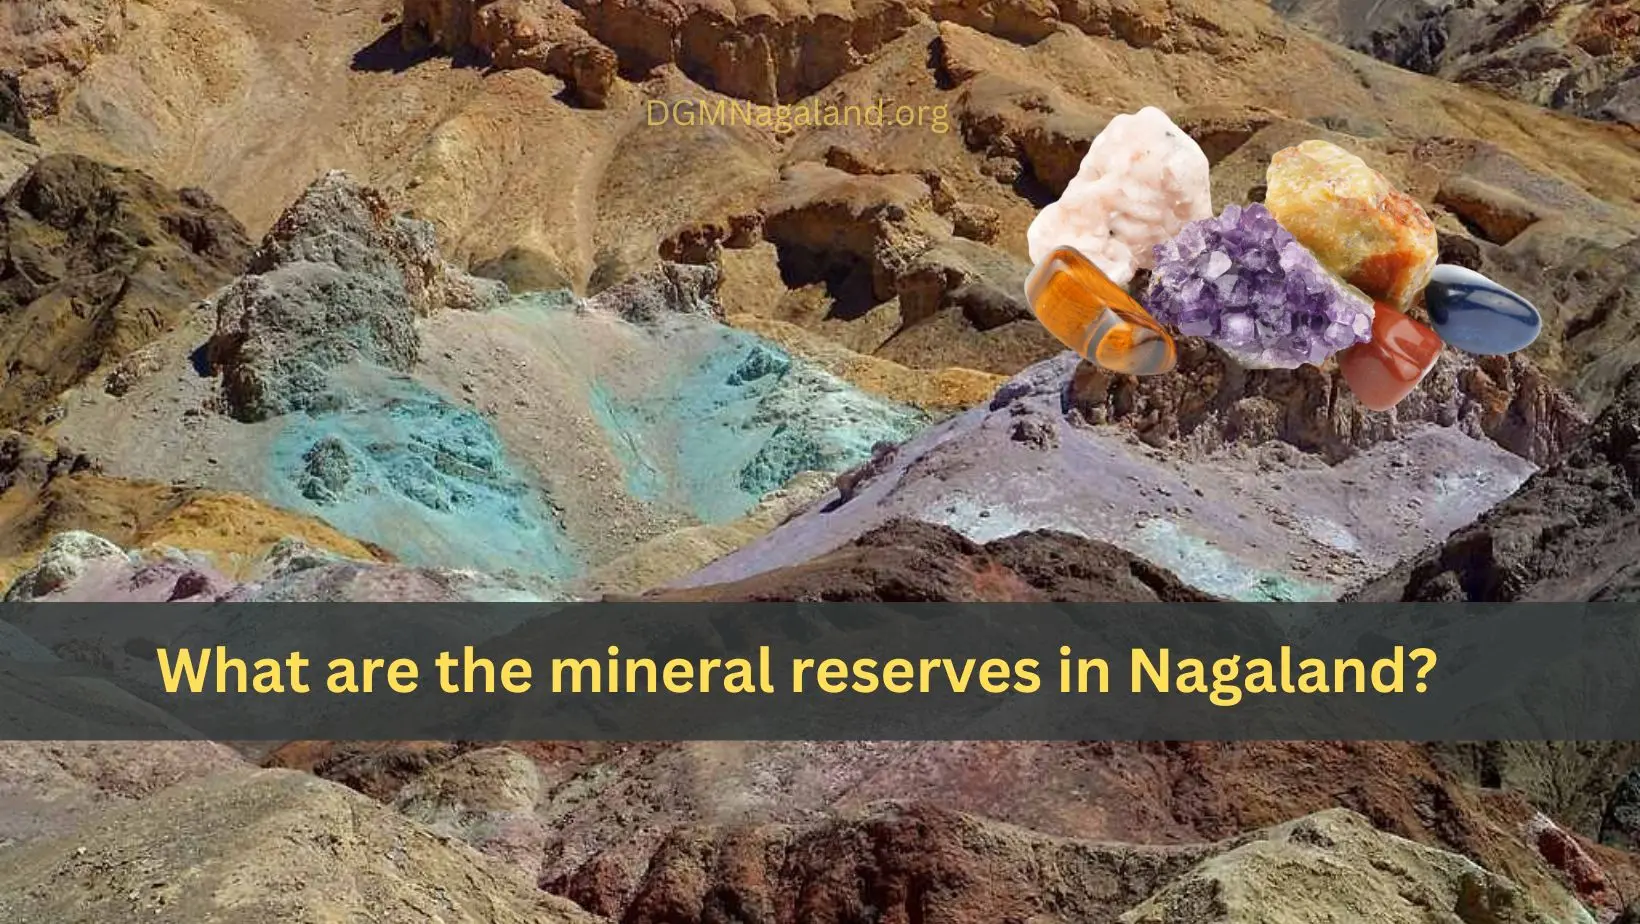 What are the mineral reserves in Nagaland?